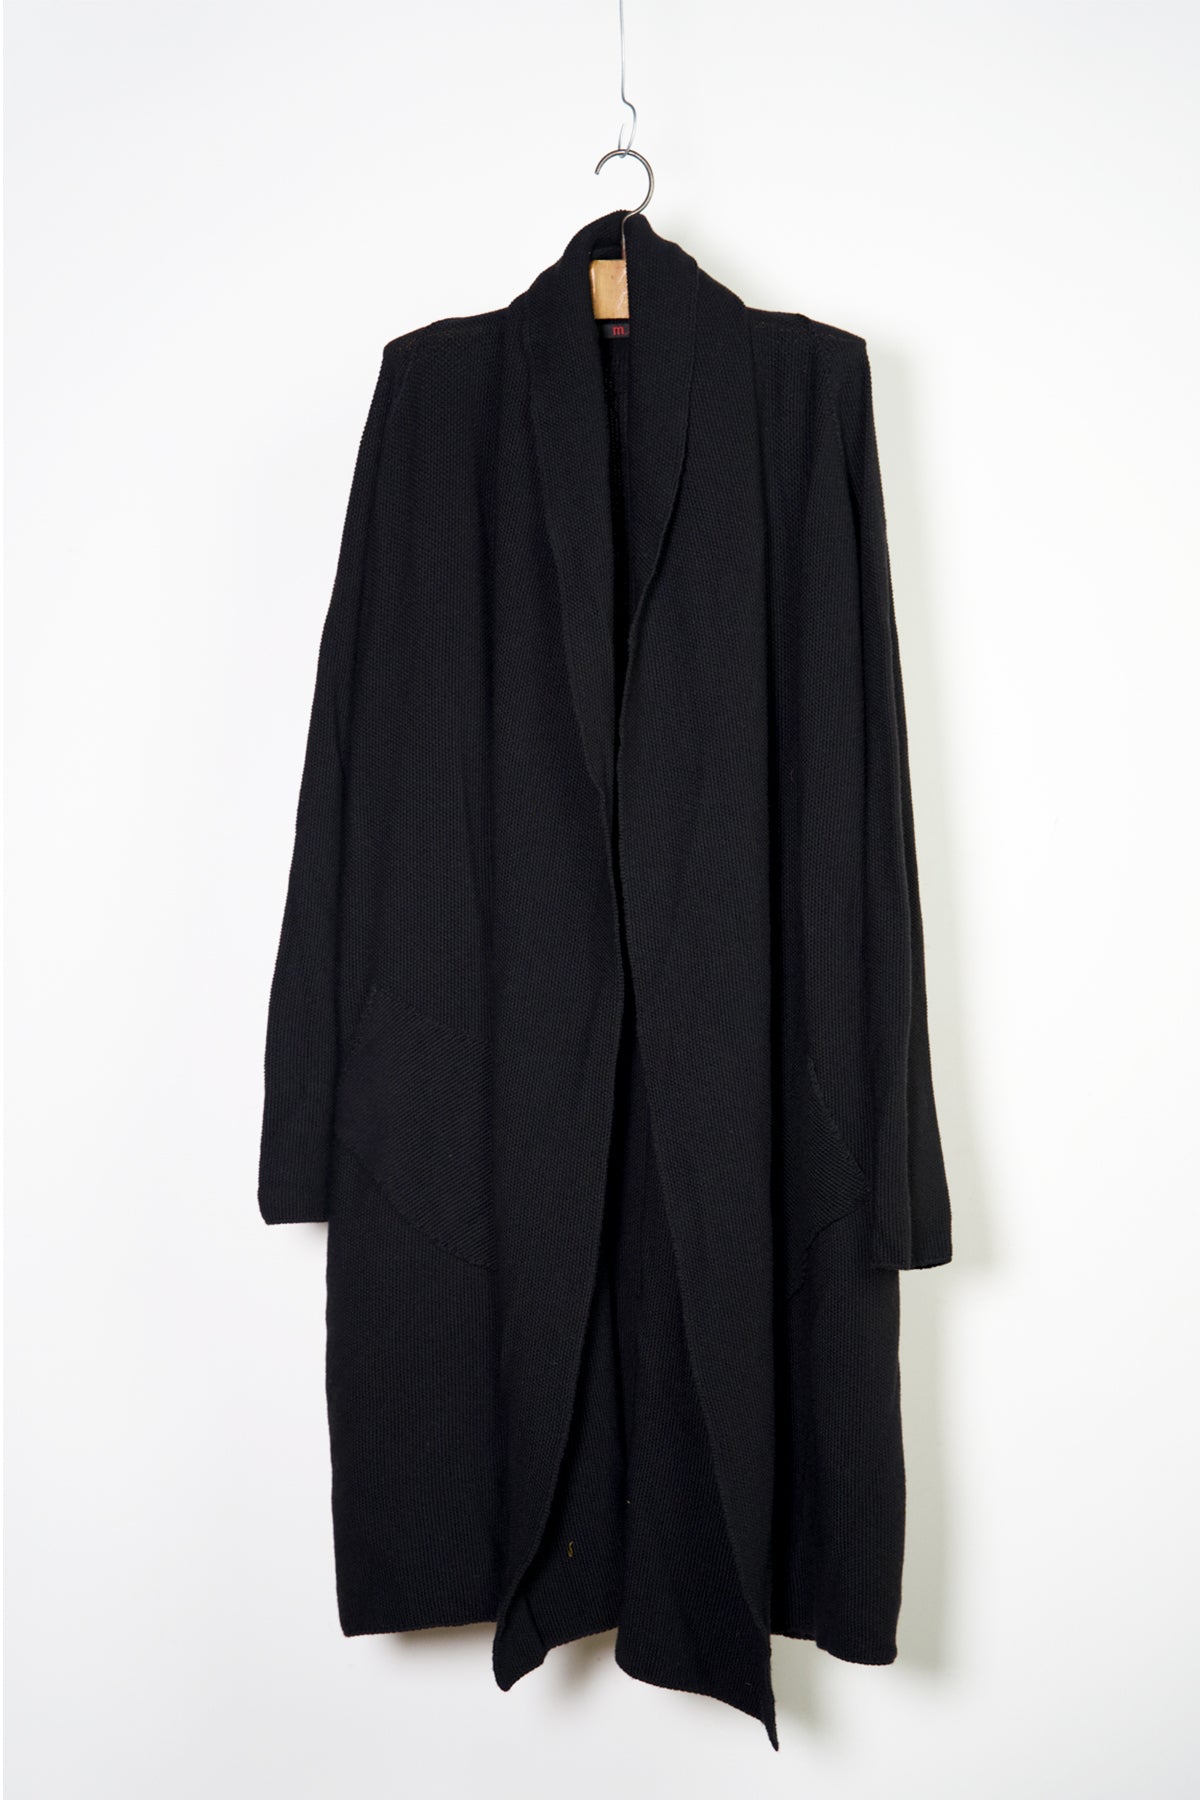 kn. hooded outer mitten pocket coat